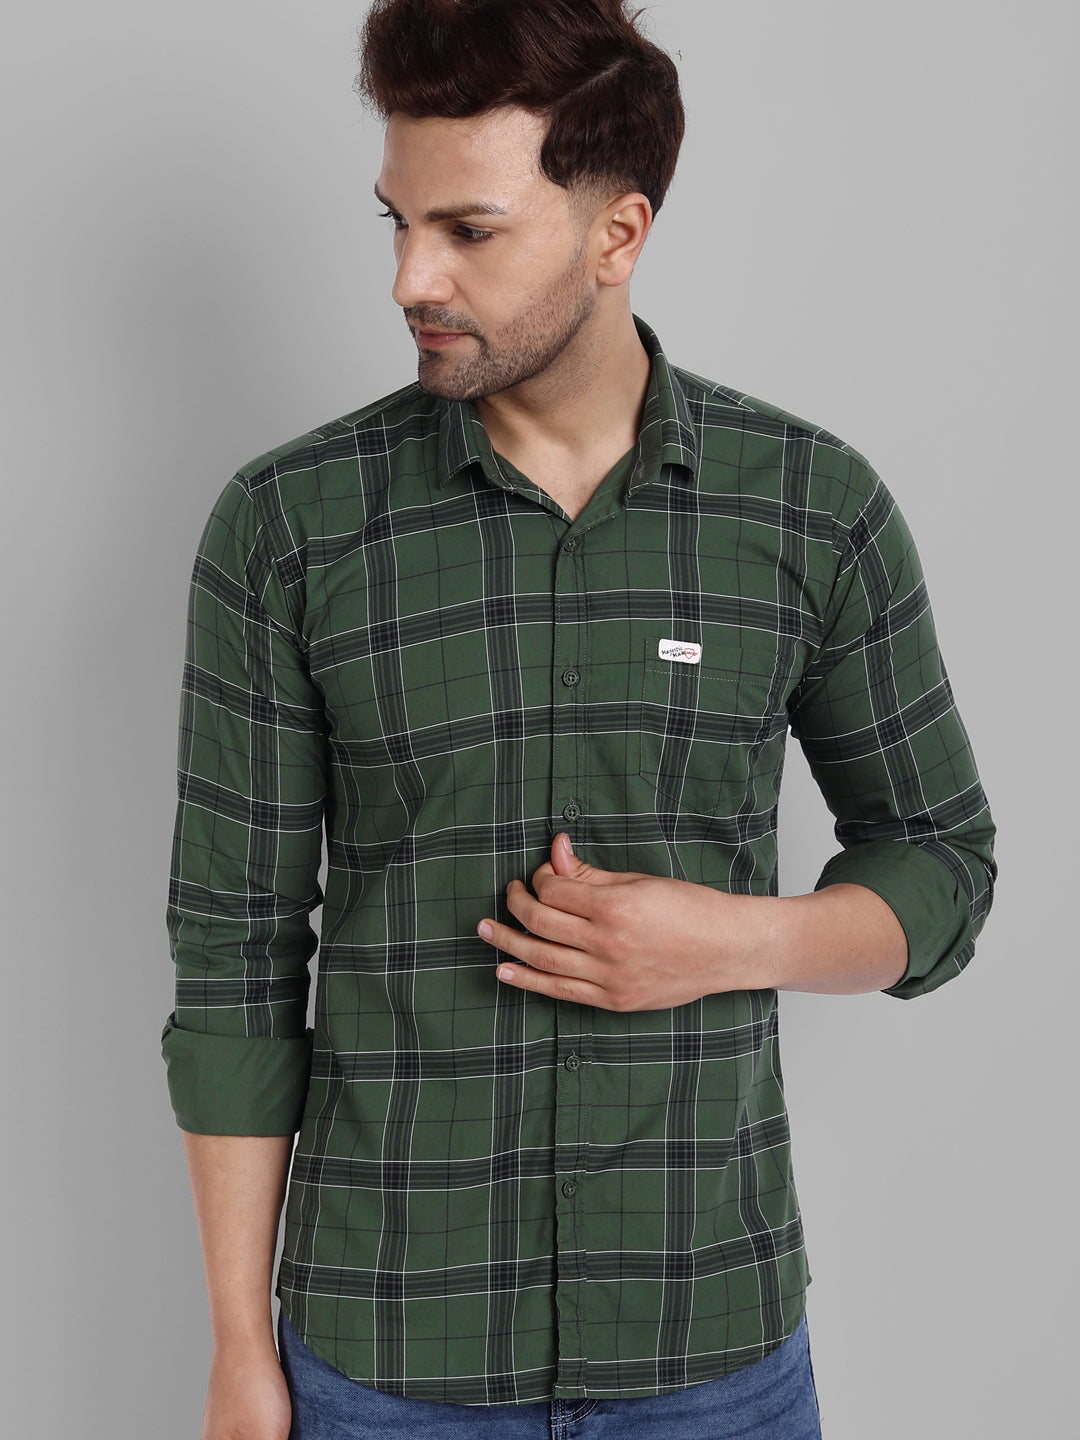 Classic Checkmate Pure Cotton Checkered Shirt - Bottle Green